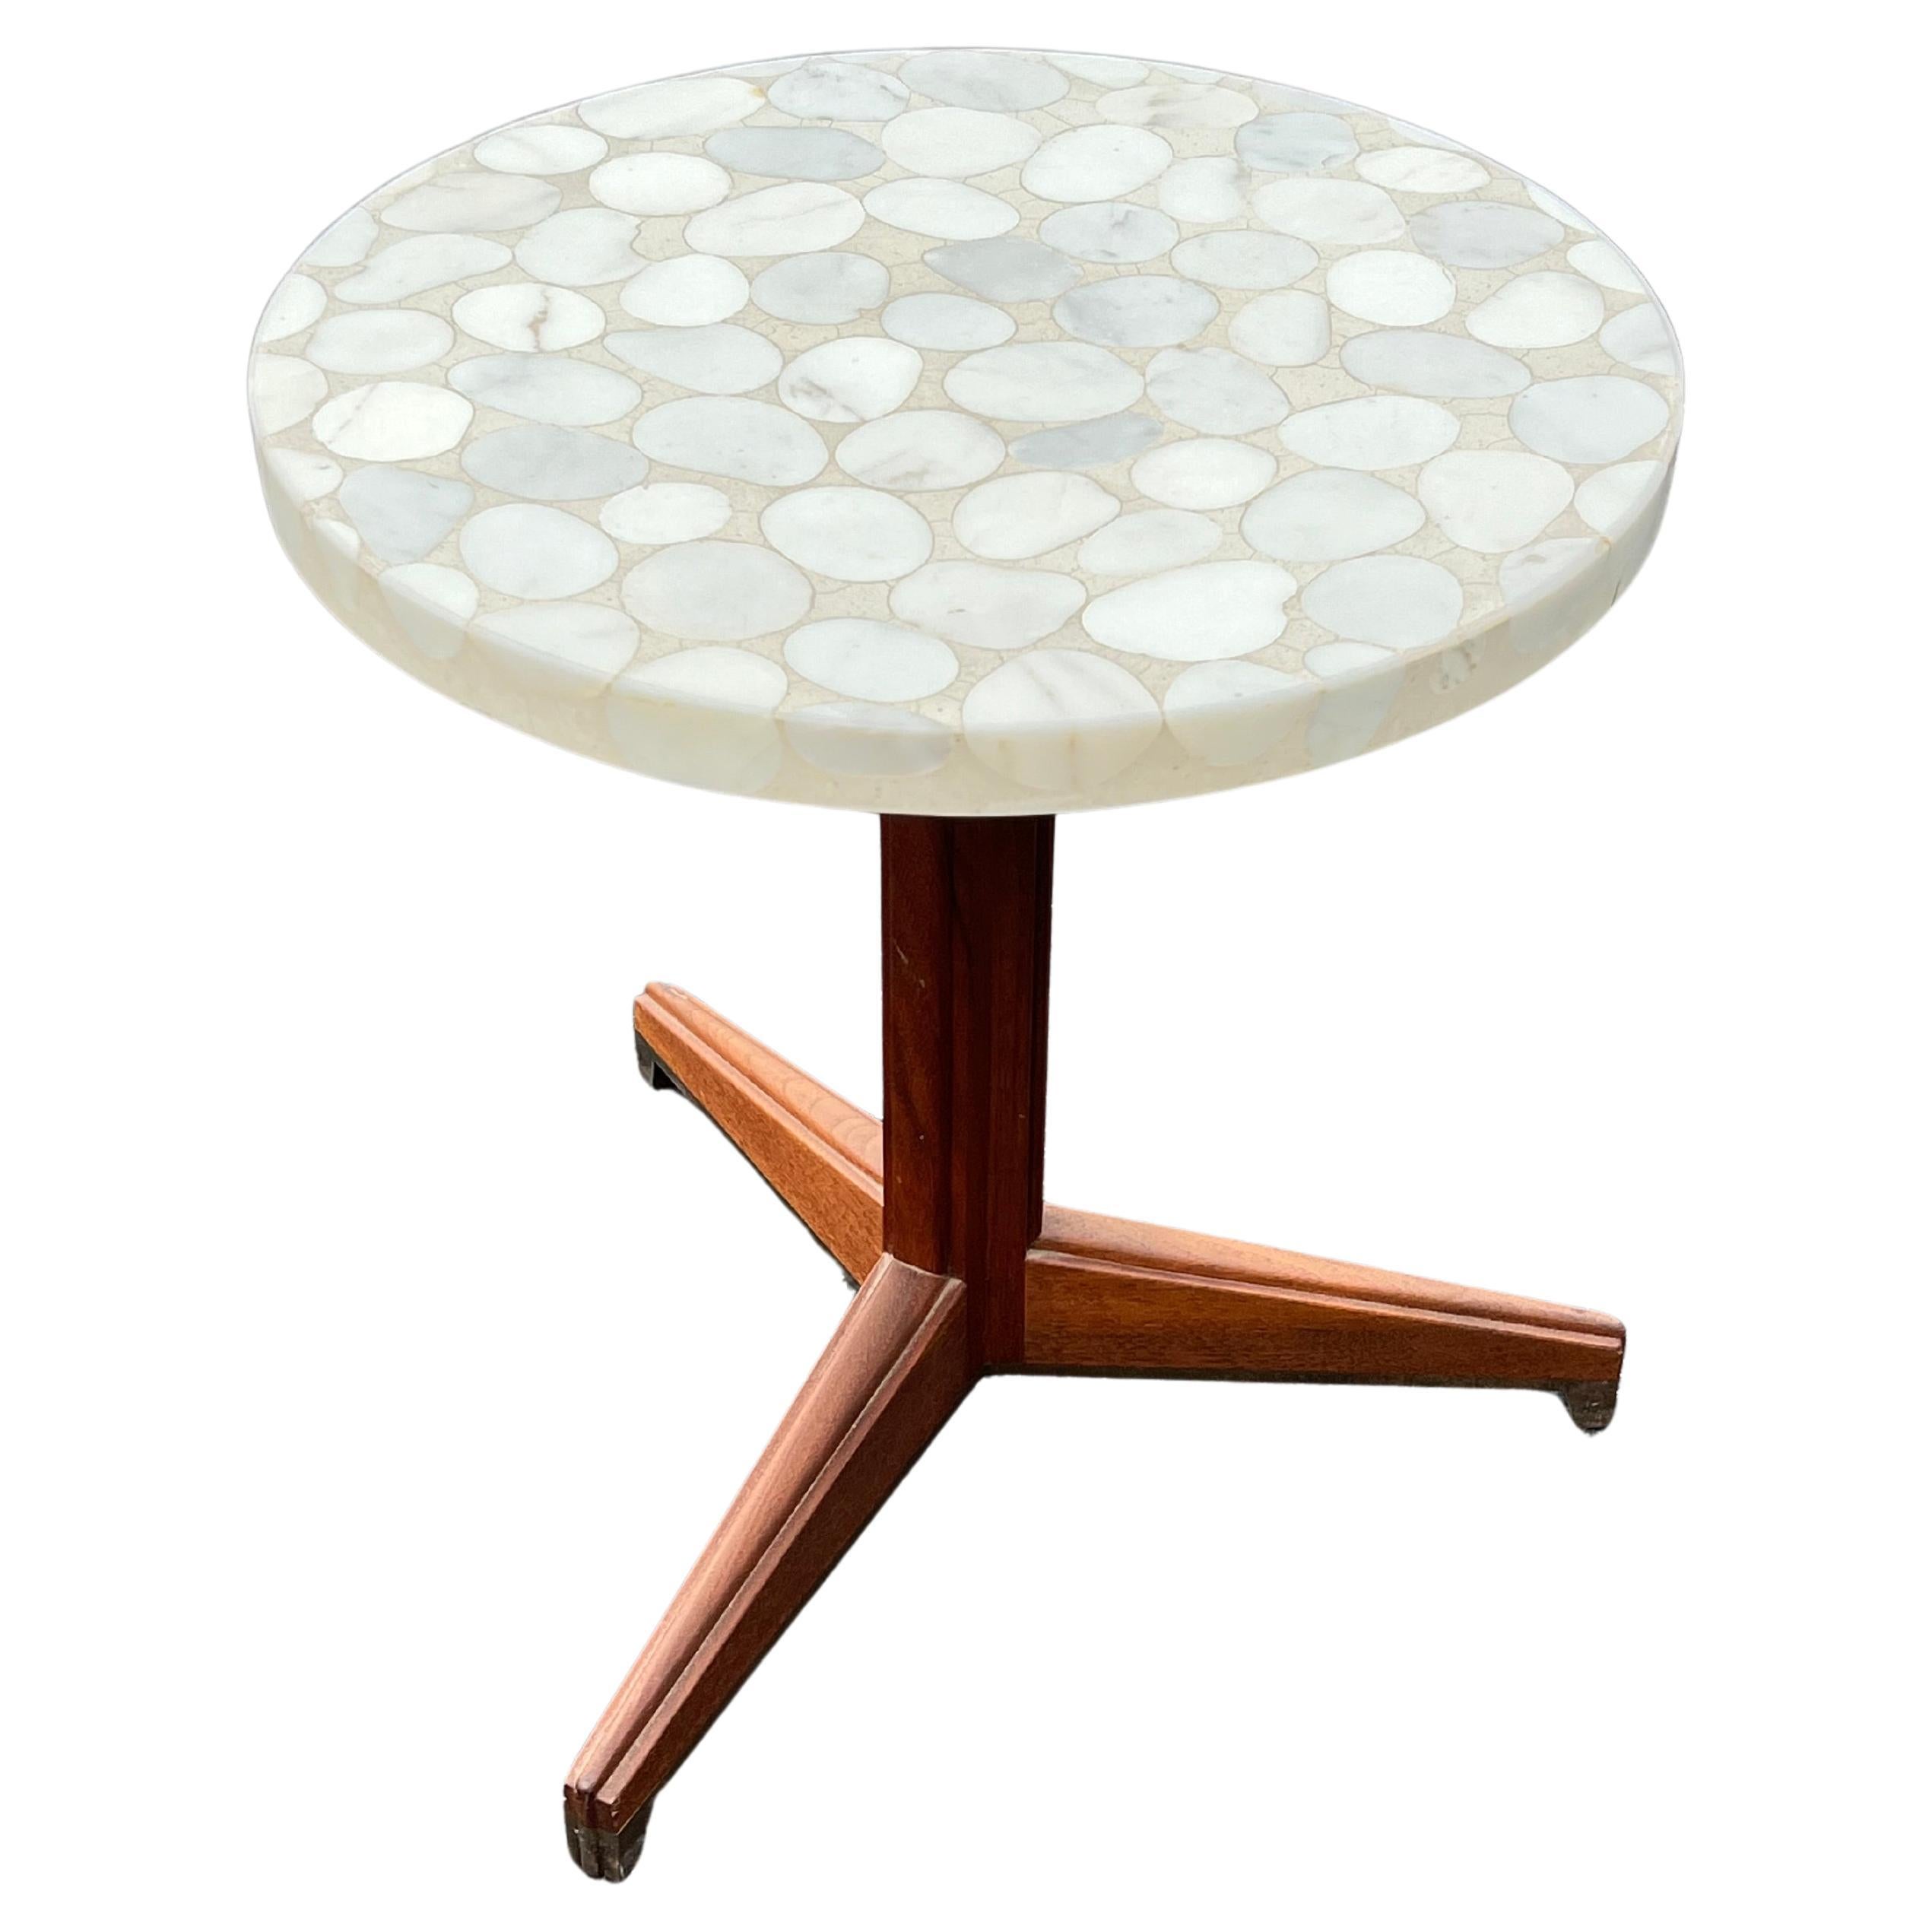 Edward Wormley for Dunbar Table with Marble Terrazzo Top